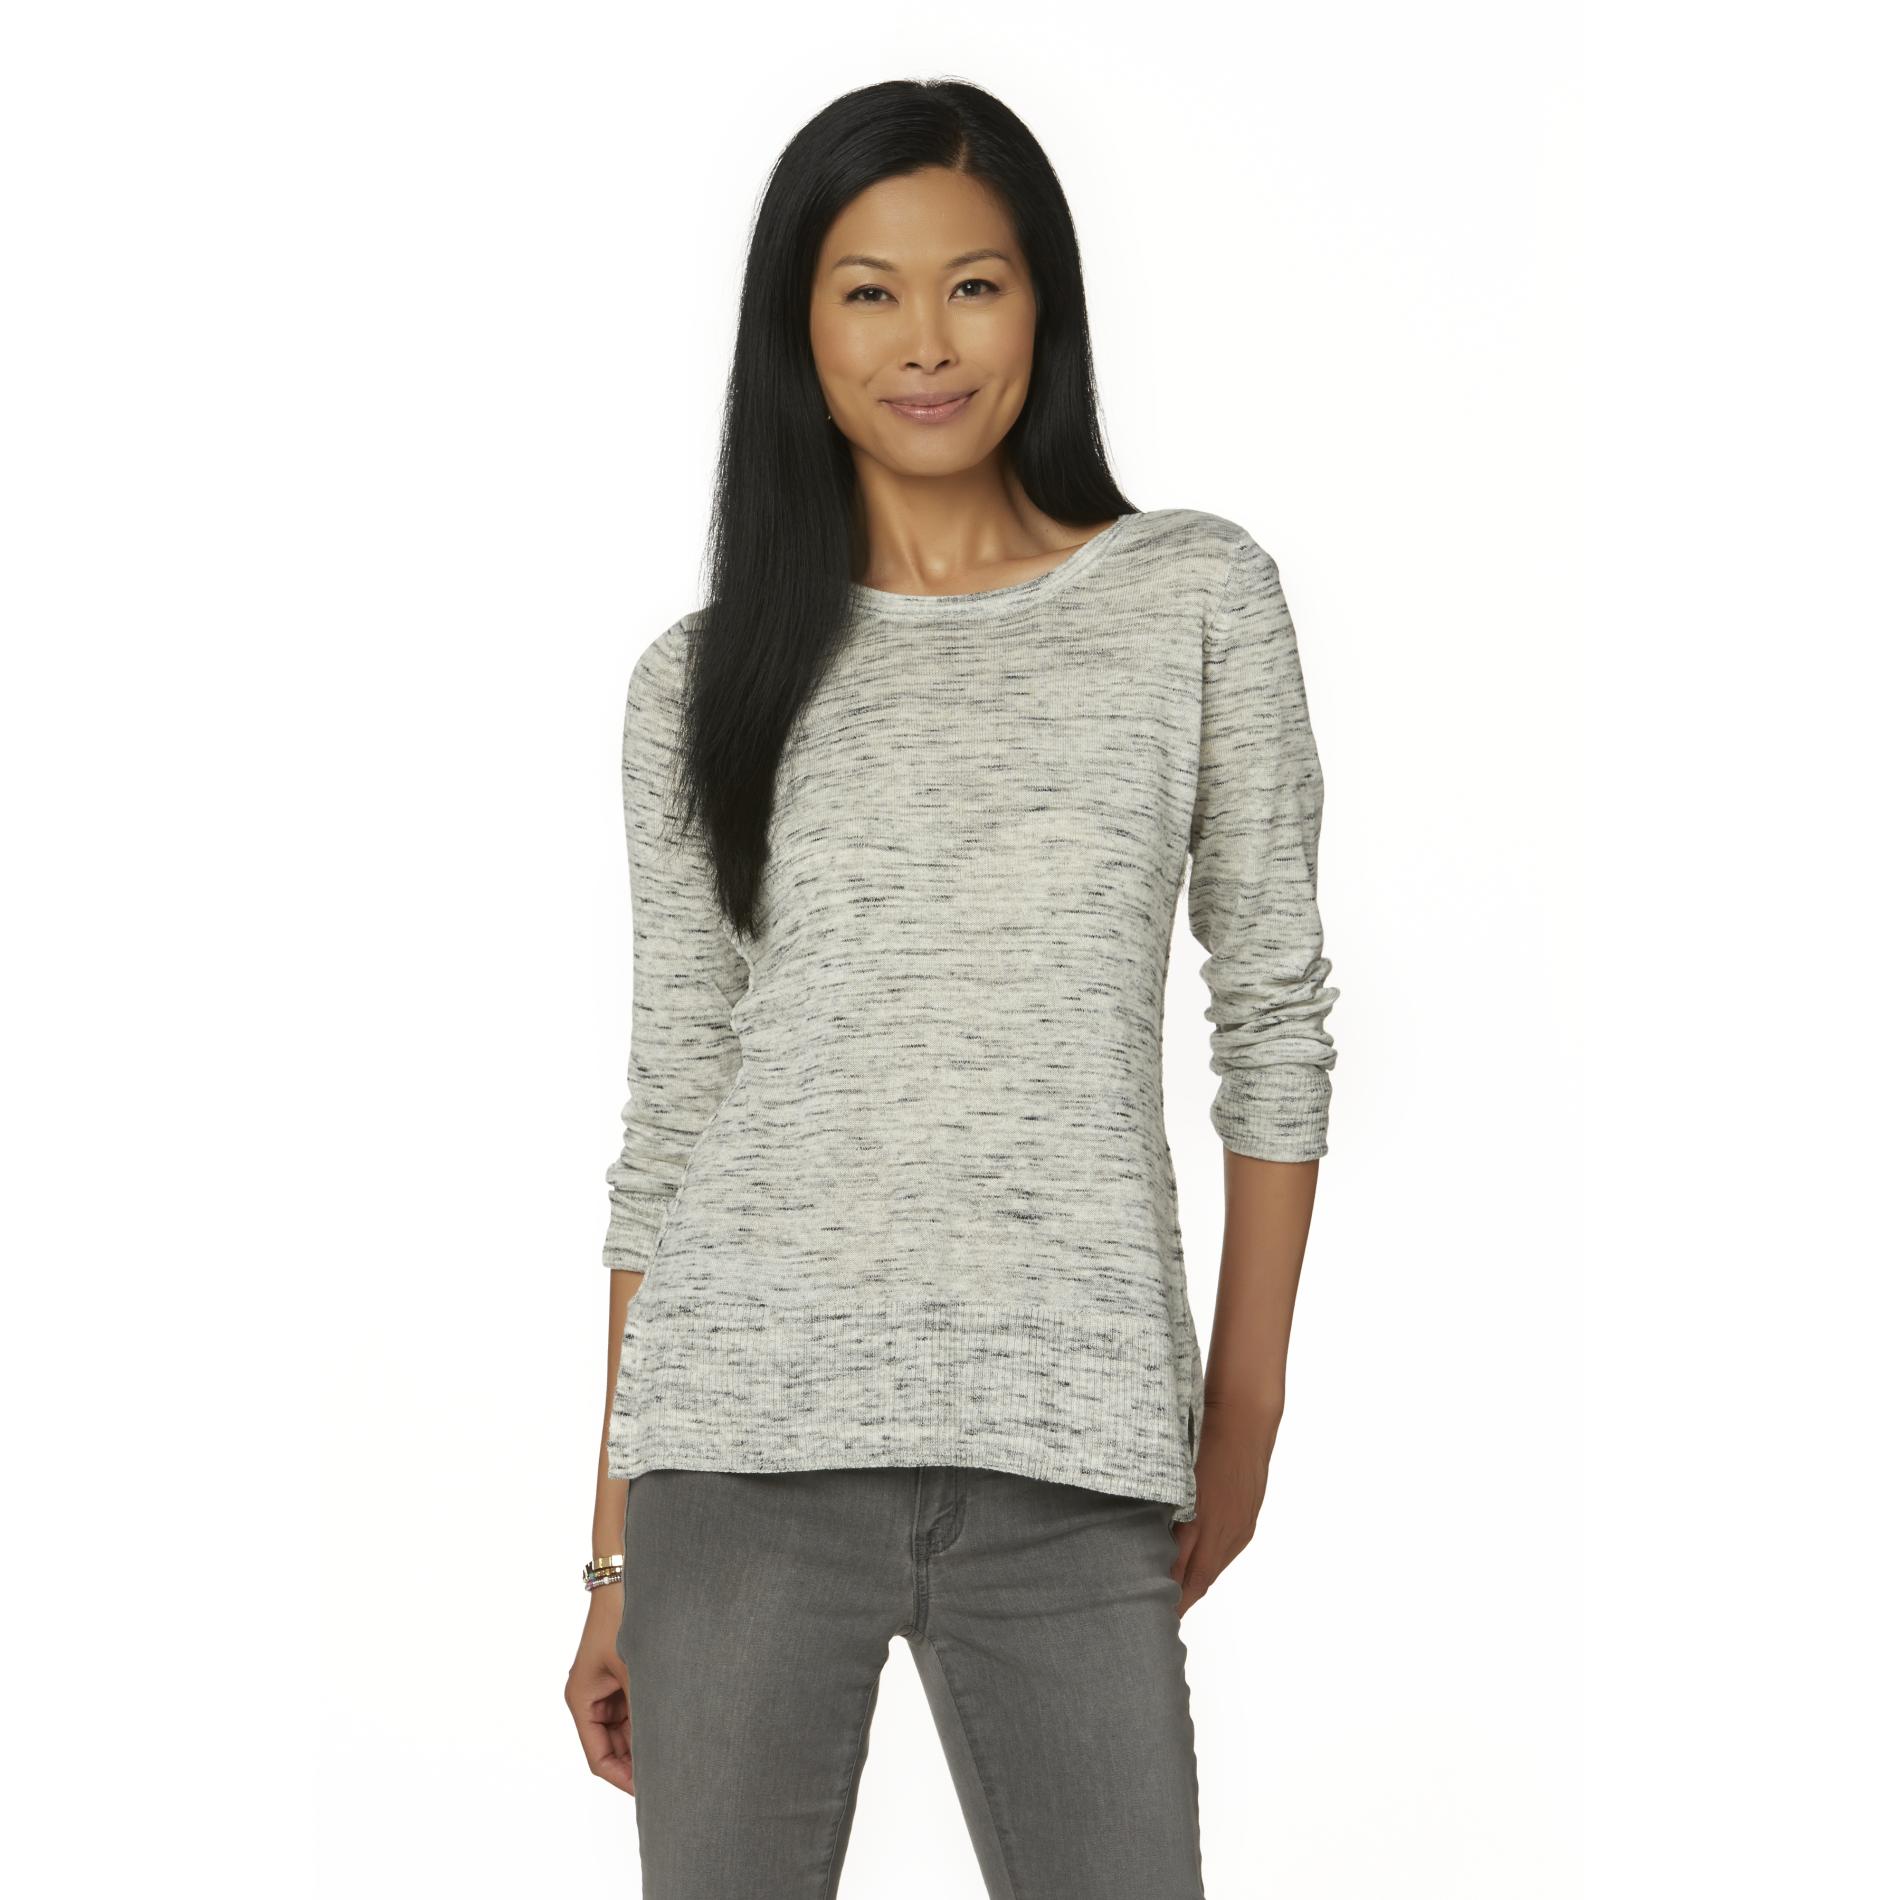 Basic Editions Women's Sweater - Space Dyed